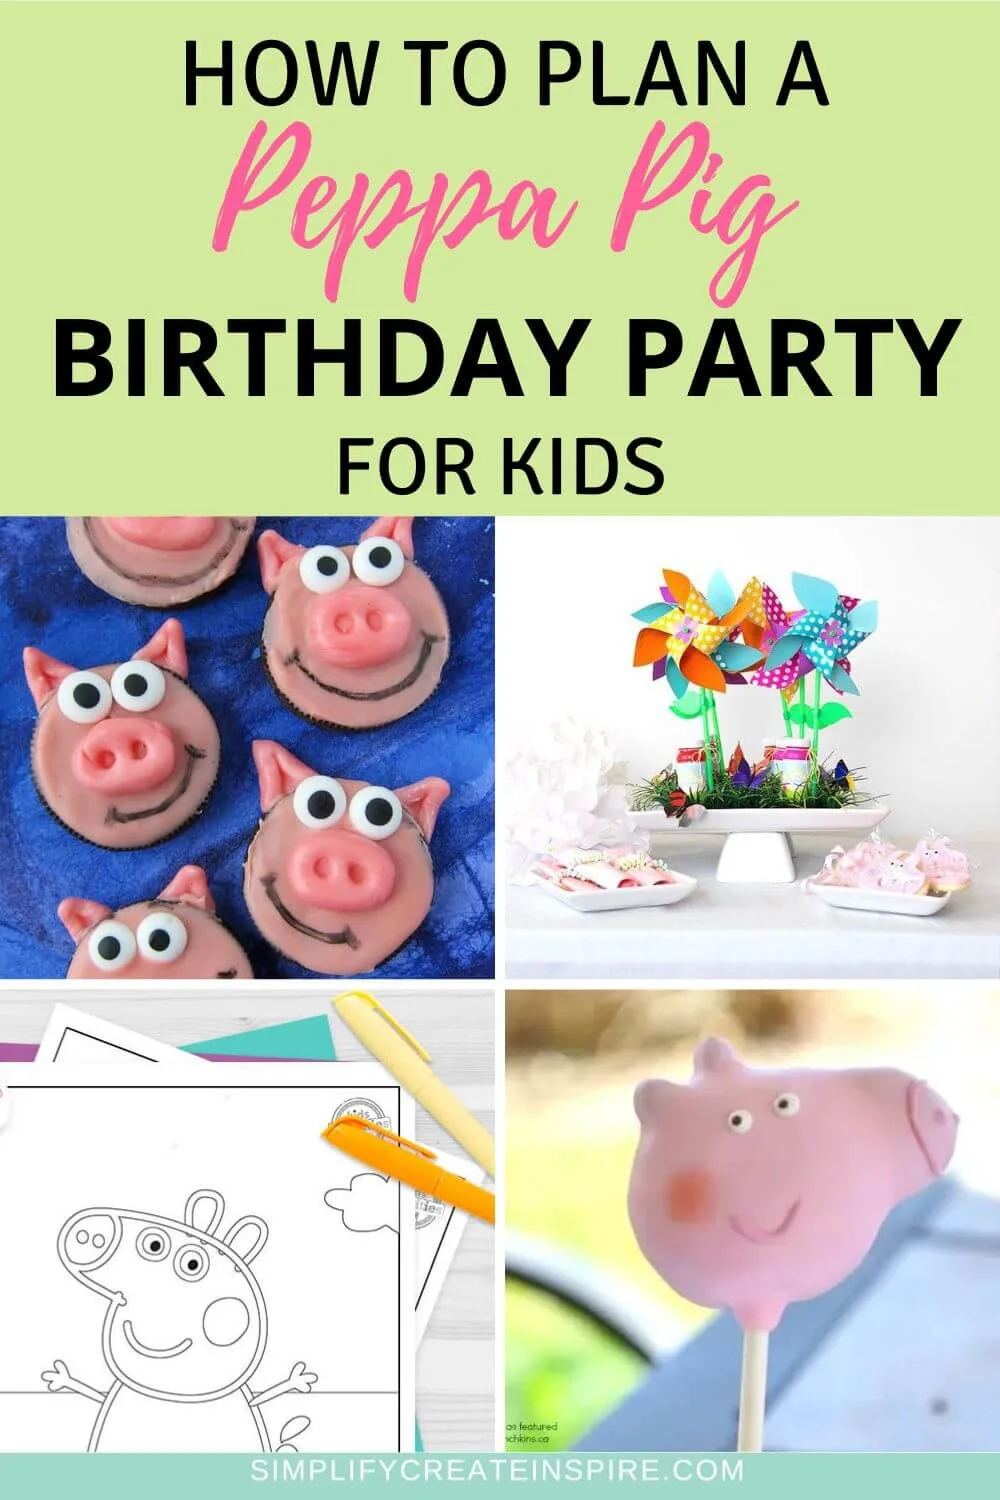 Peppa pig party ideas